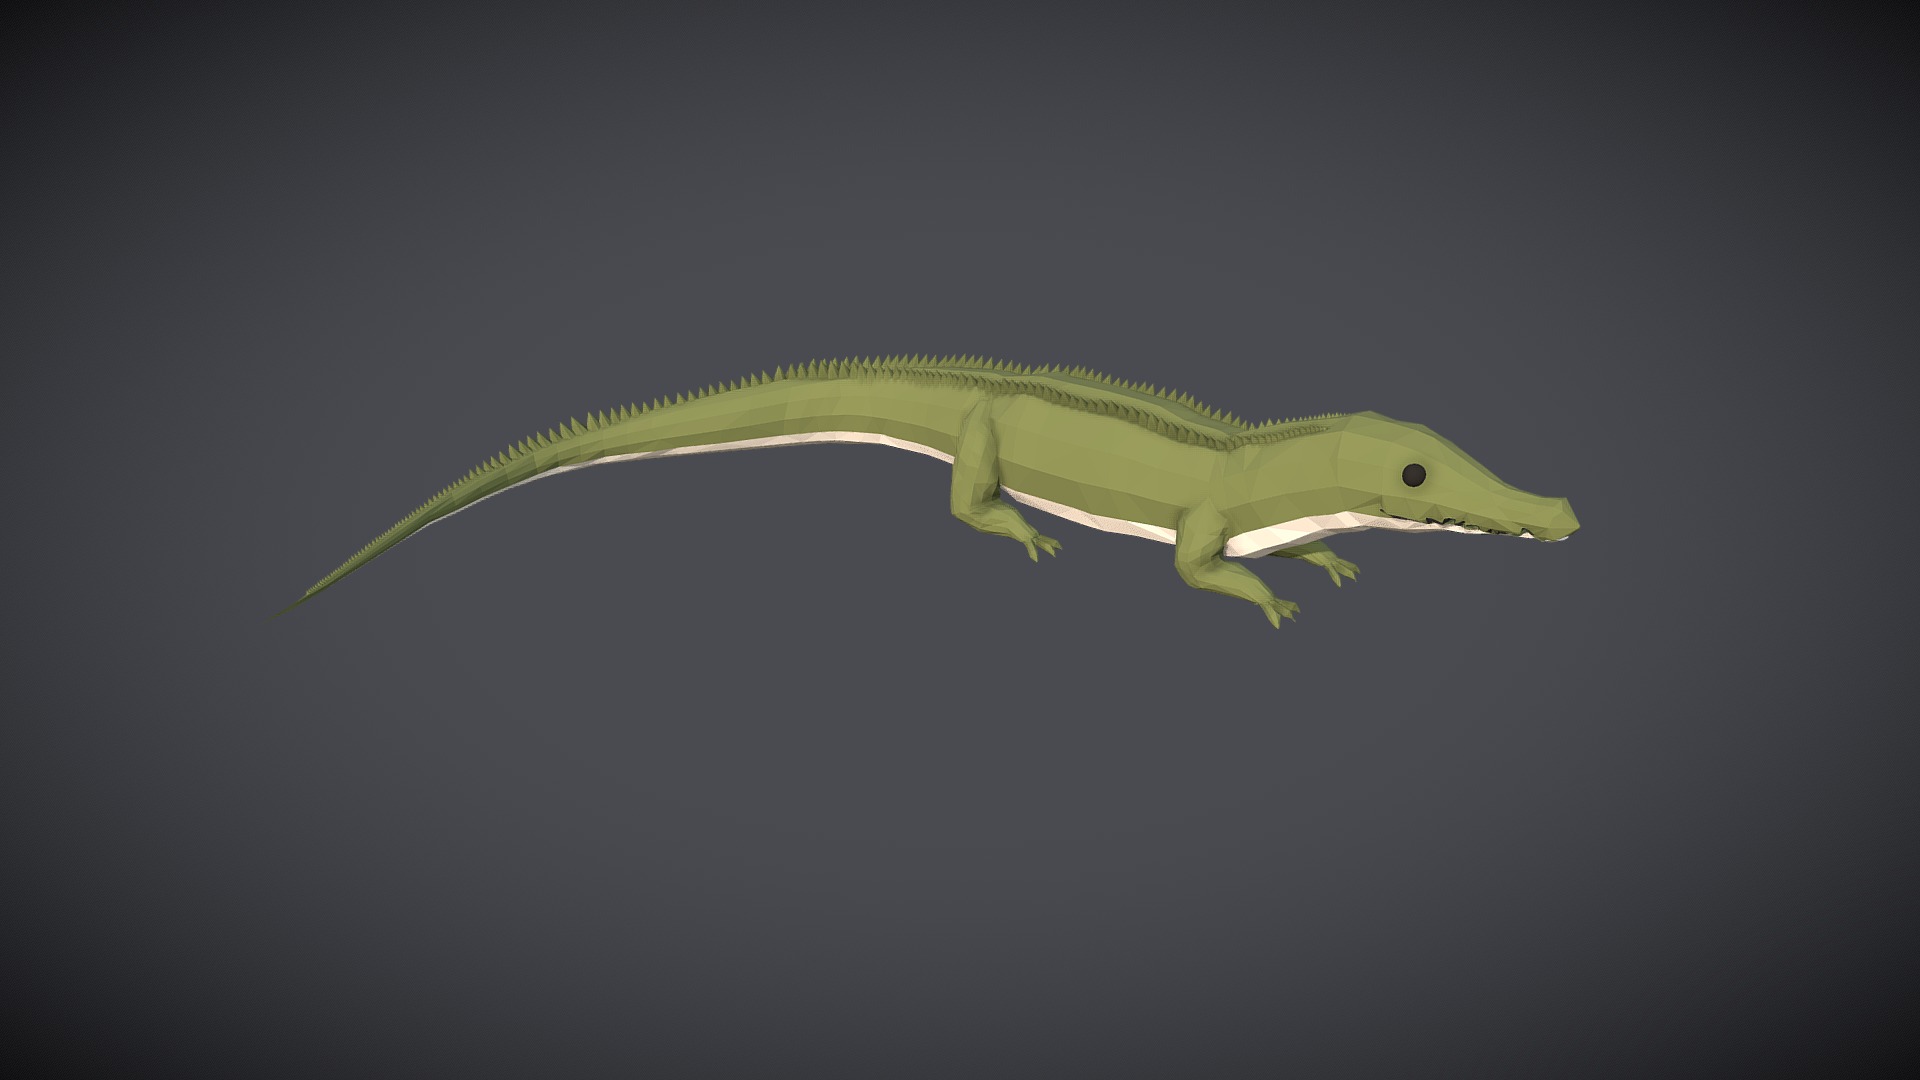 3D model Low-Poly Crocodile - This is a 3D model of the Low-Poly Crocodile. The 3D model is about a green lizard on a black background.